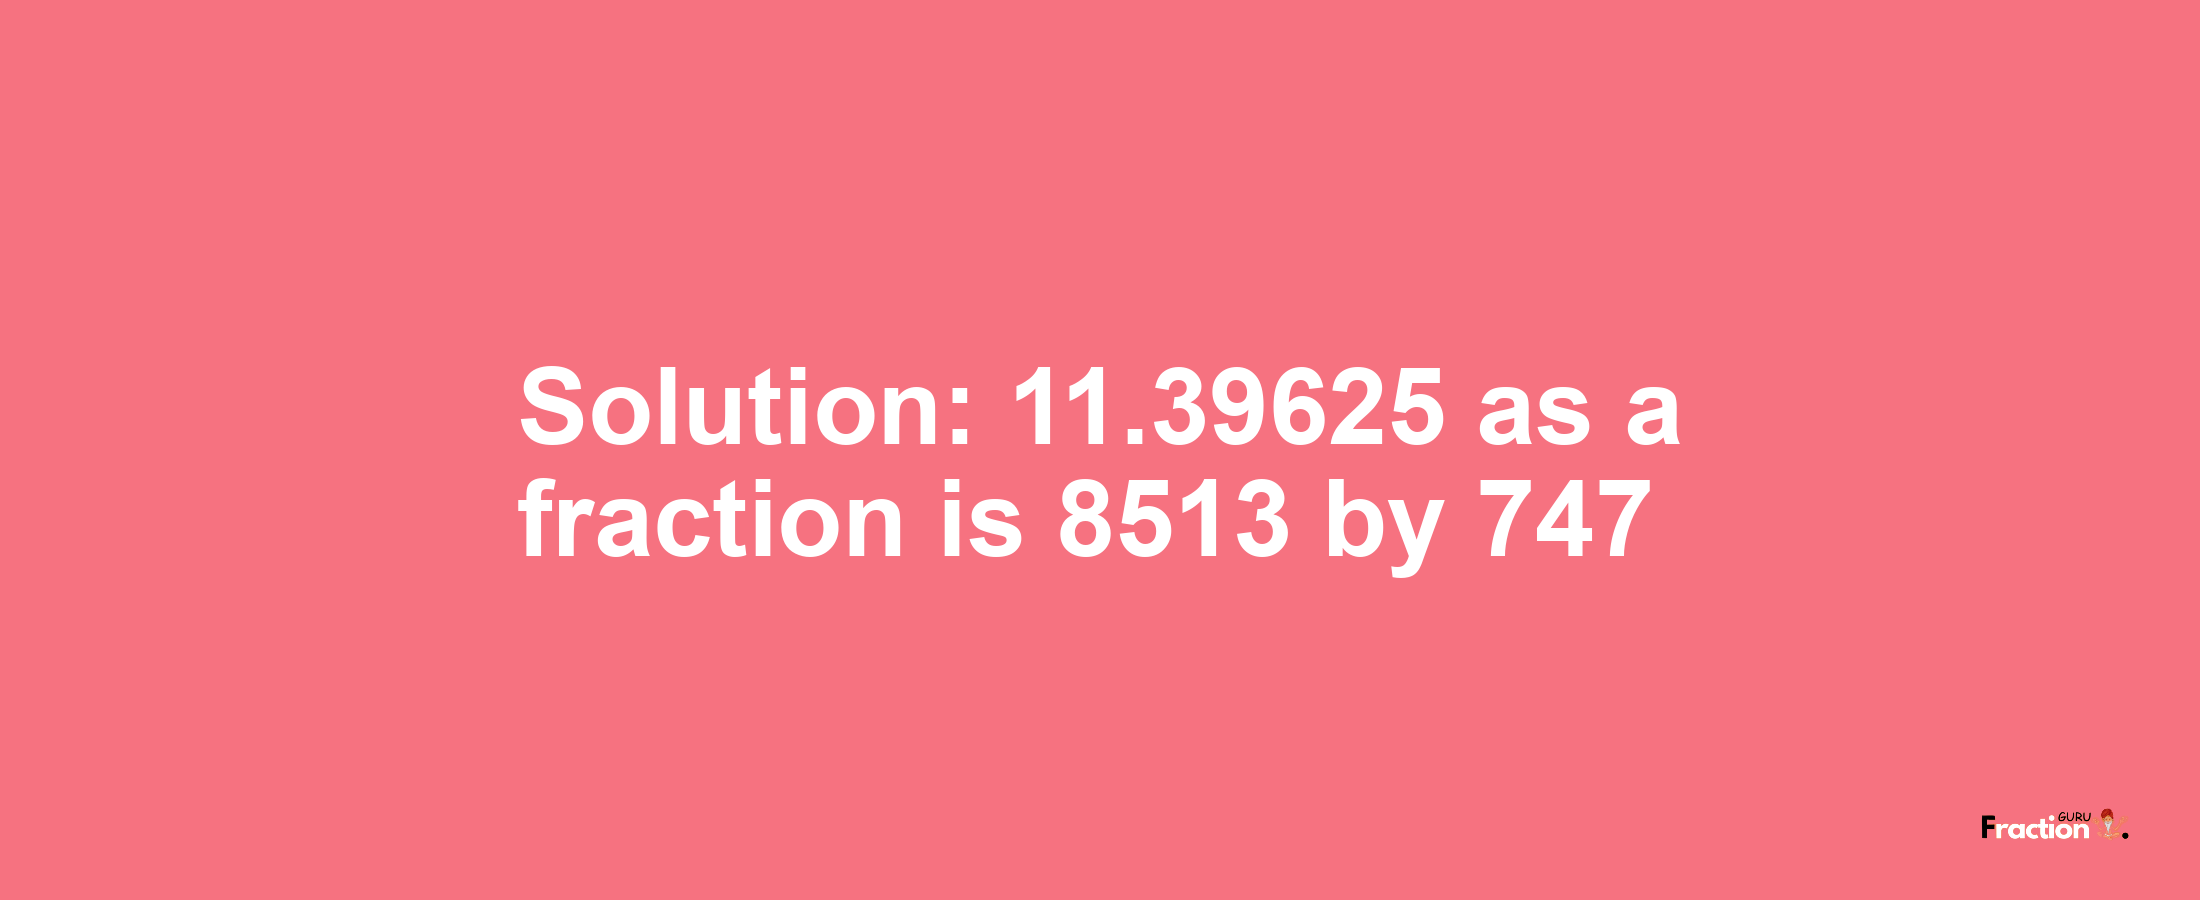 Solution:11.39625 as a fraction is 8513/747